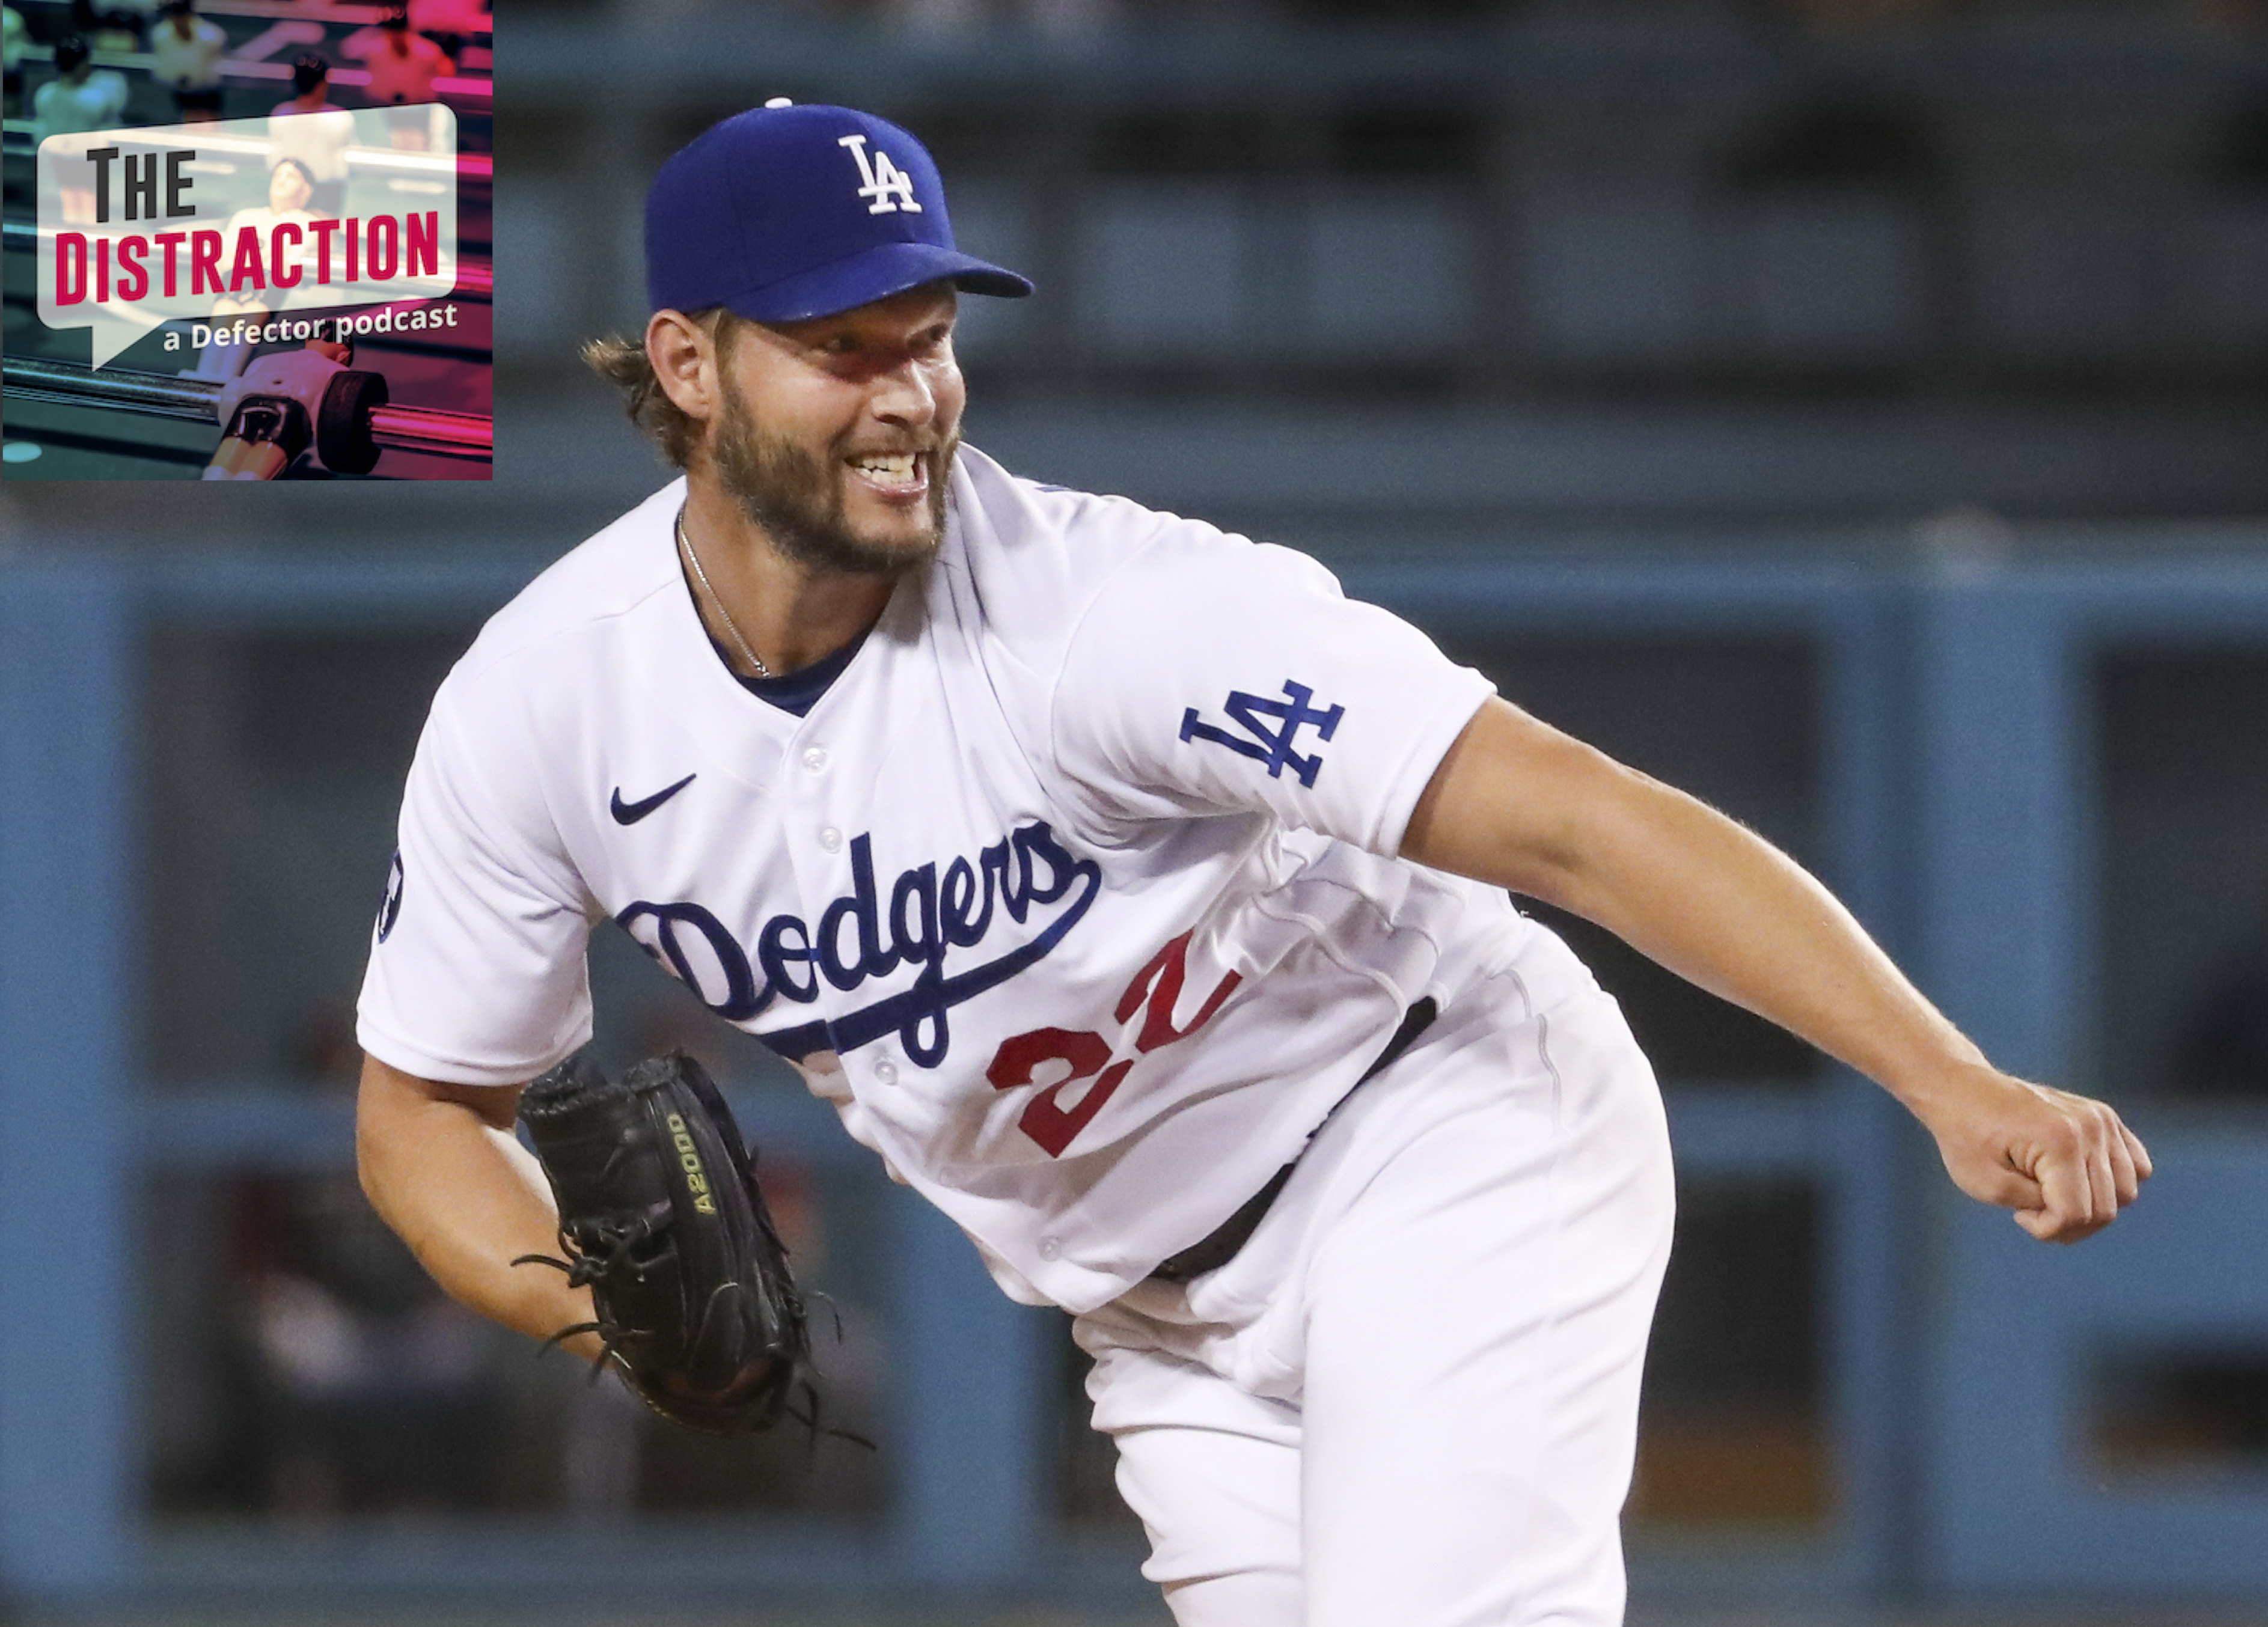 Clayton Kershaw, either smiling or grimacing after throwing a pitch against the Diamondbacks in a Dodgers win in September of 2022.